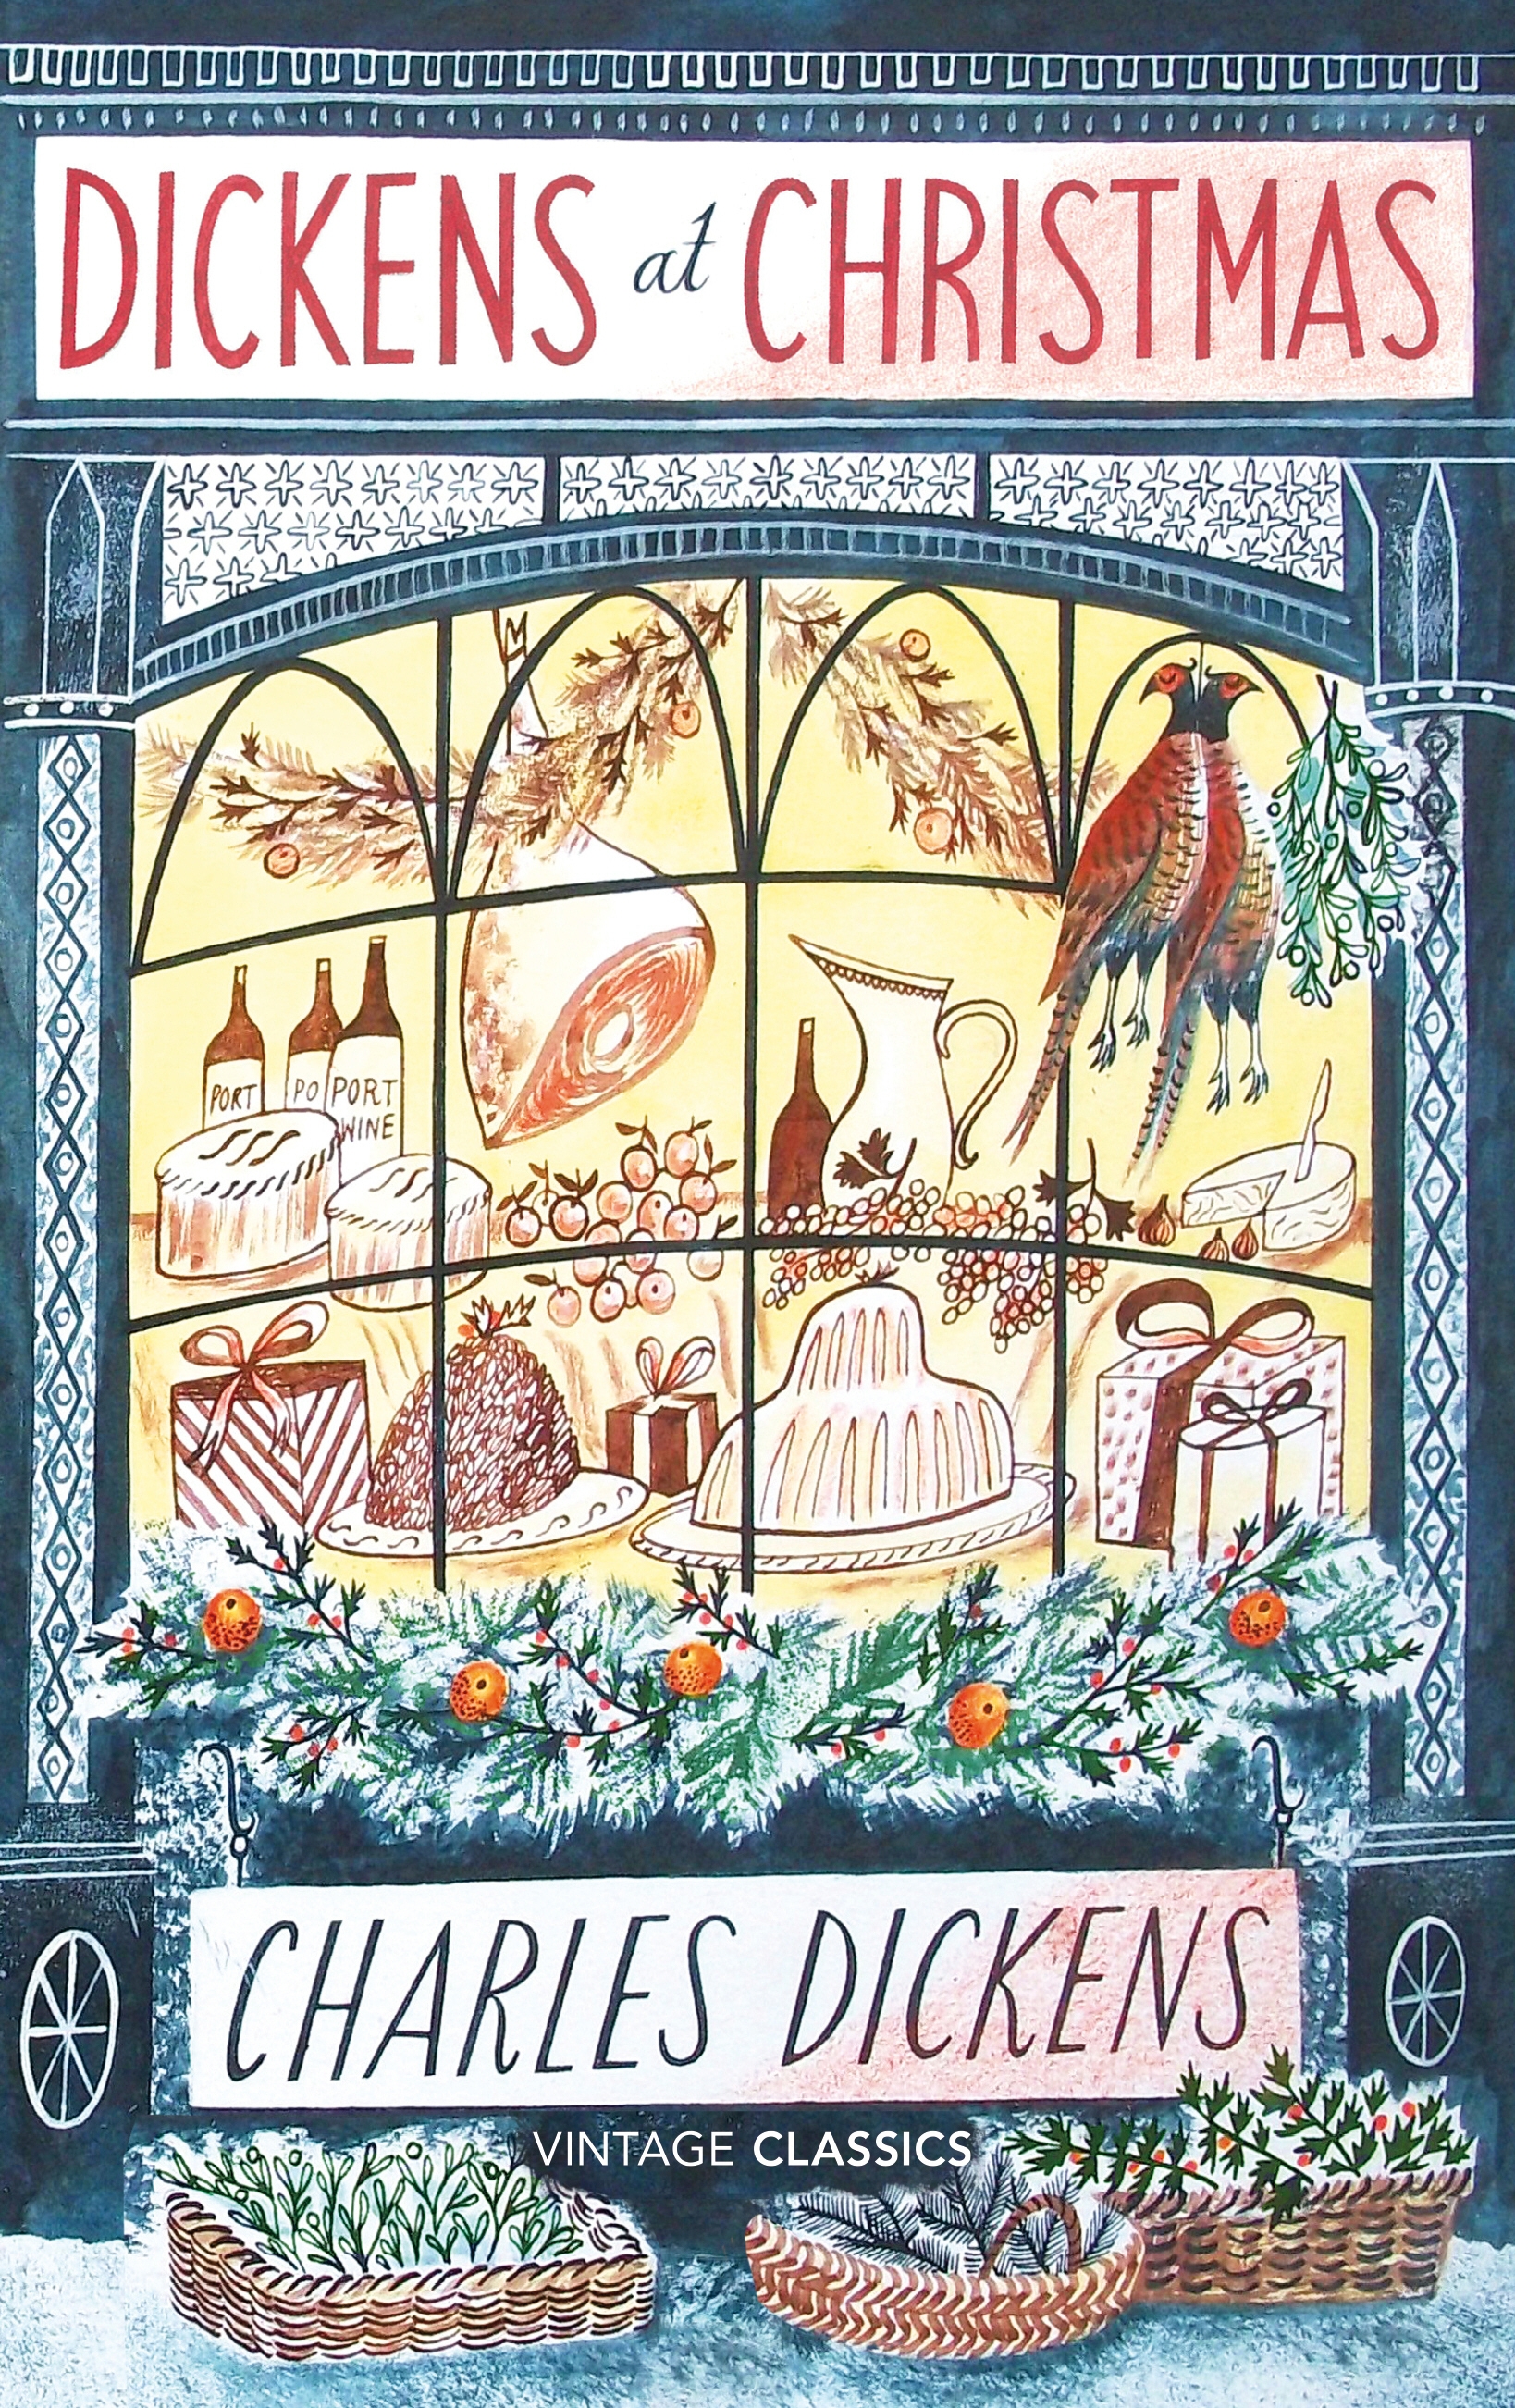 Dickens at Christmas by Charles Dickens Penguin Books Australia